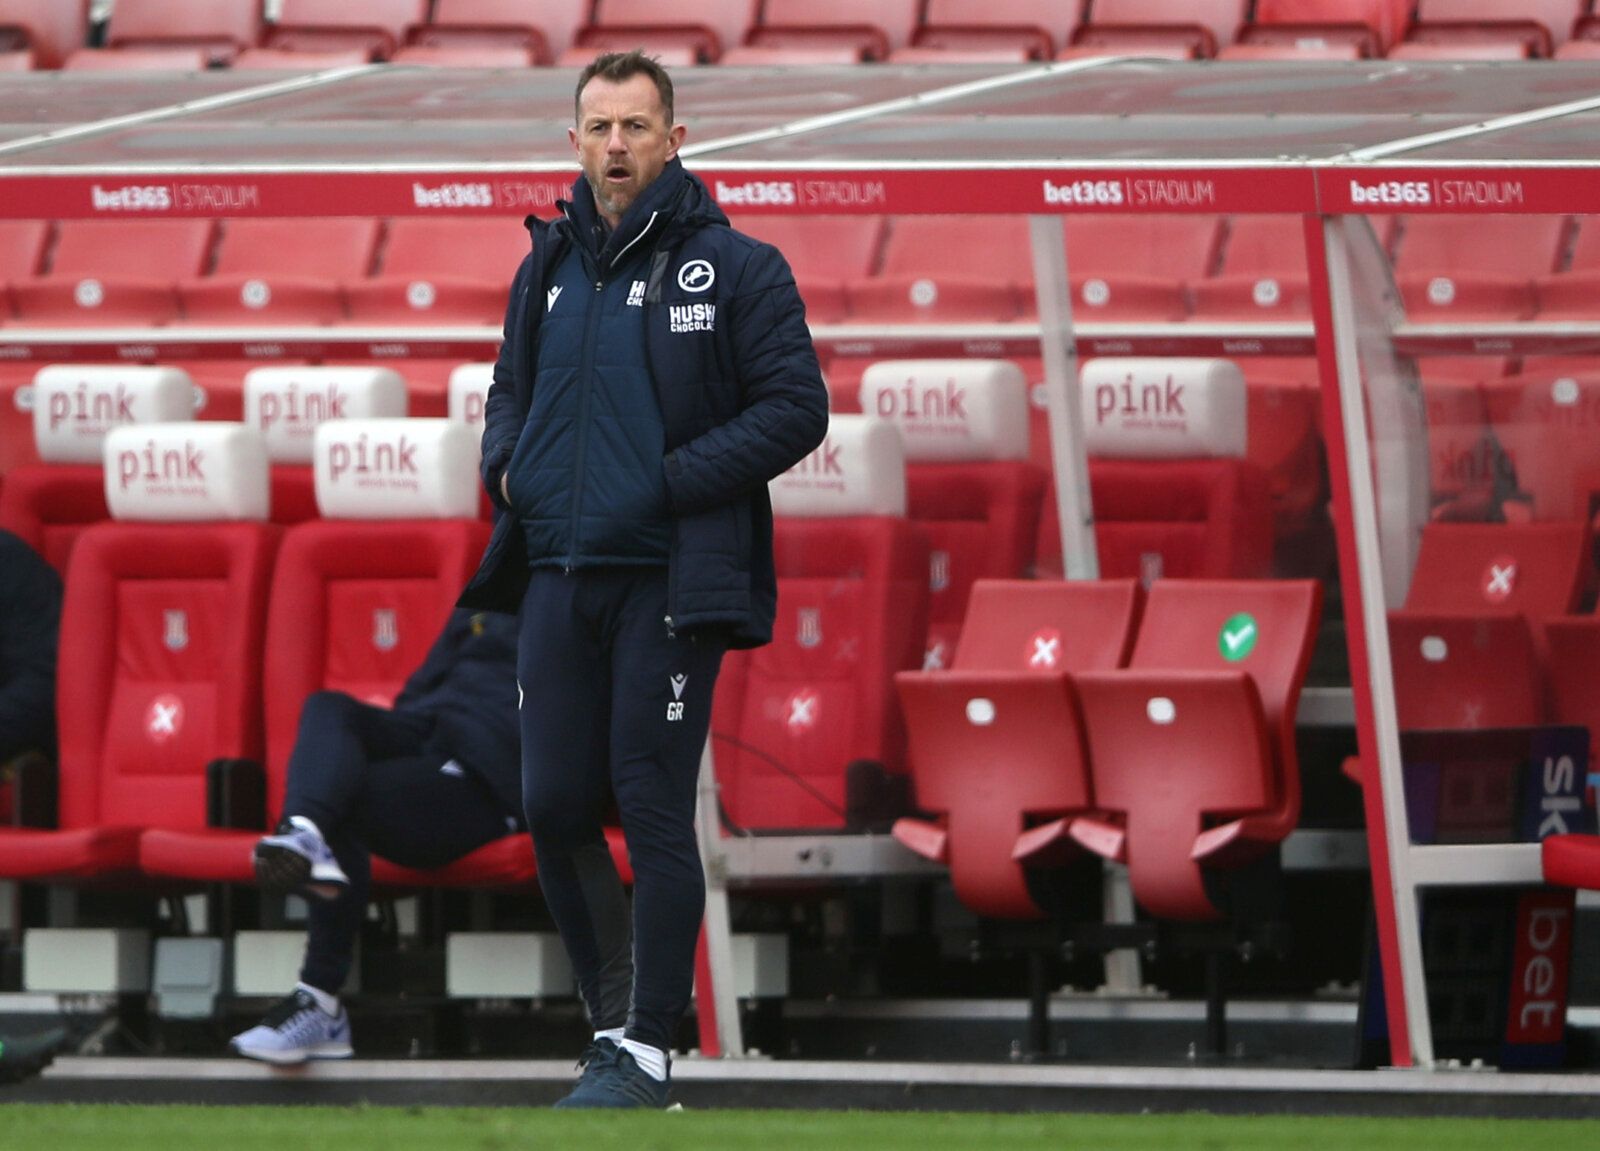 Soccer Football - Championship - Stoke City v Millwall - bet365 Stadium, Stoke-on-Trent, Britain - April 5, 2021  Millwall manager Gary Rowett  Action Images/Molly Darlington  EDITORIAL USE ONLY. No use with unauthorized audio, video, data, fixture lists, club/league logos or 